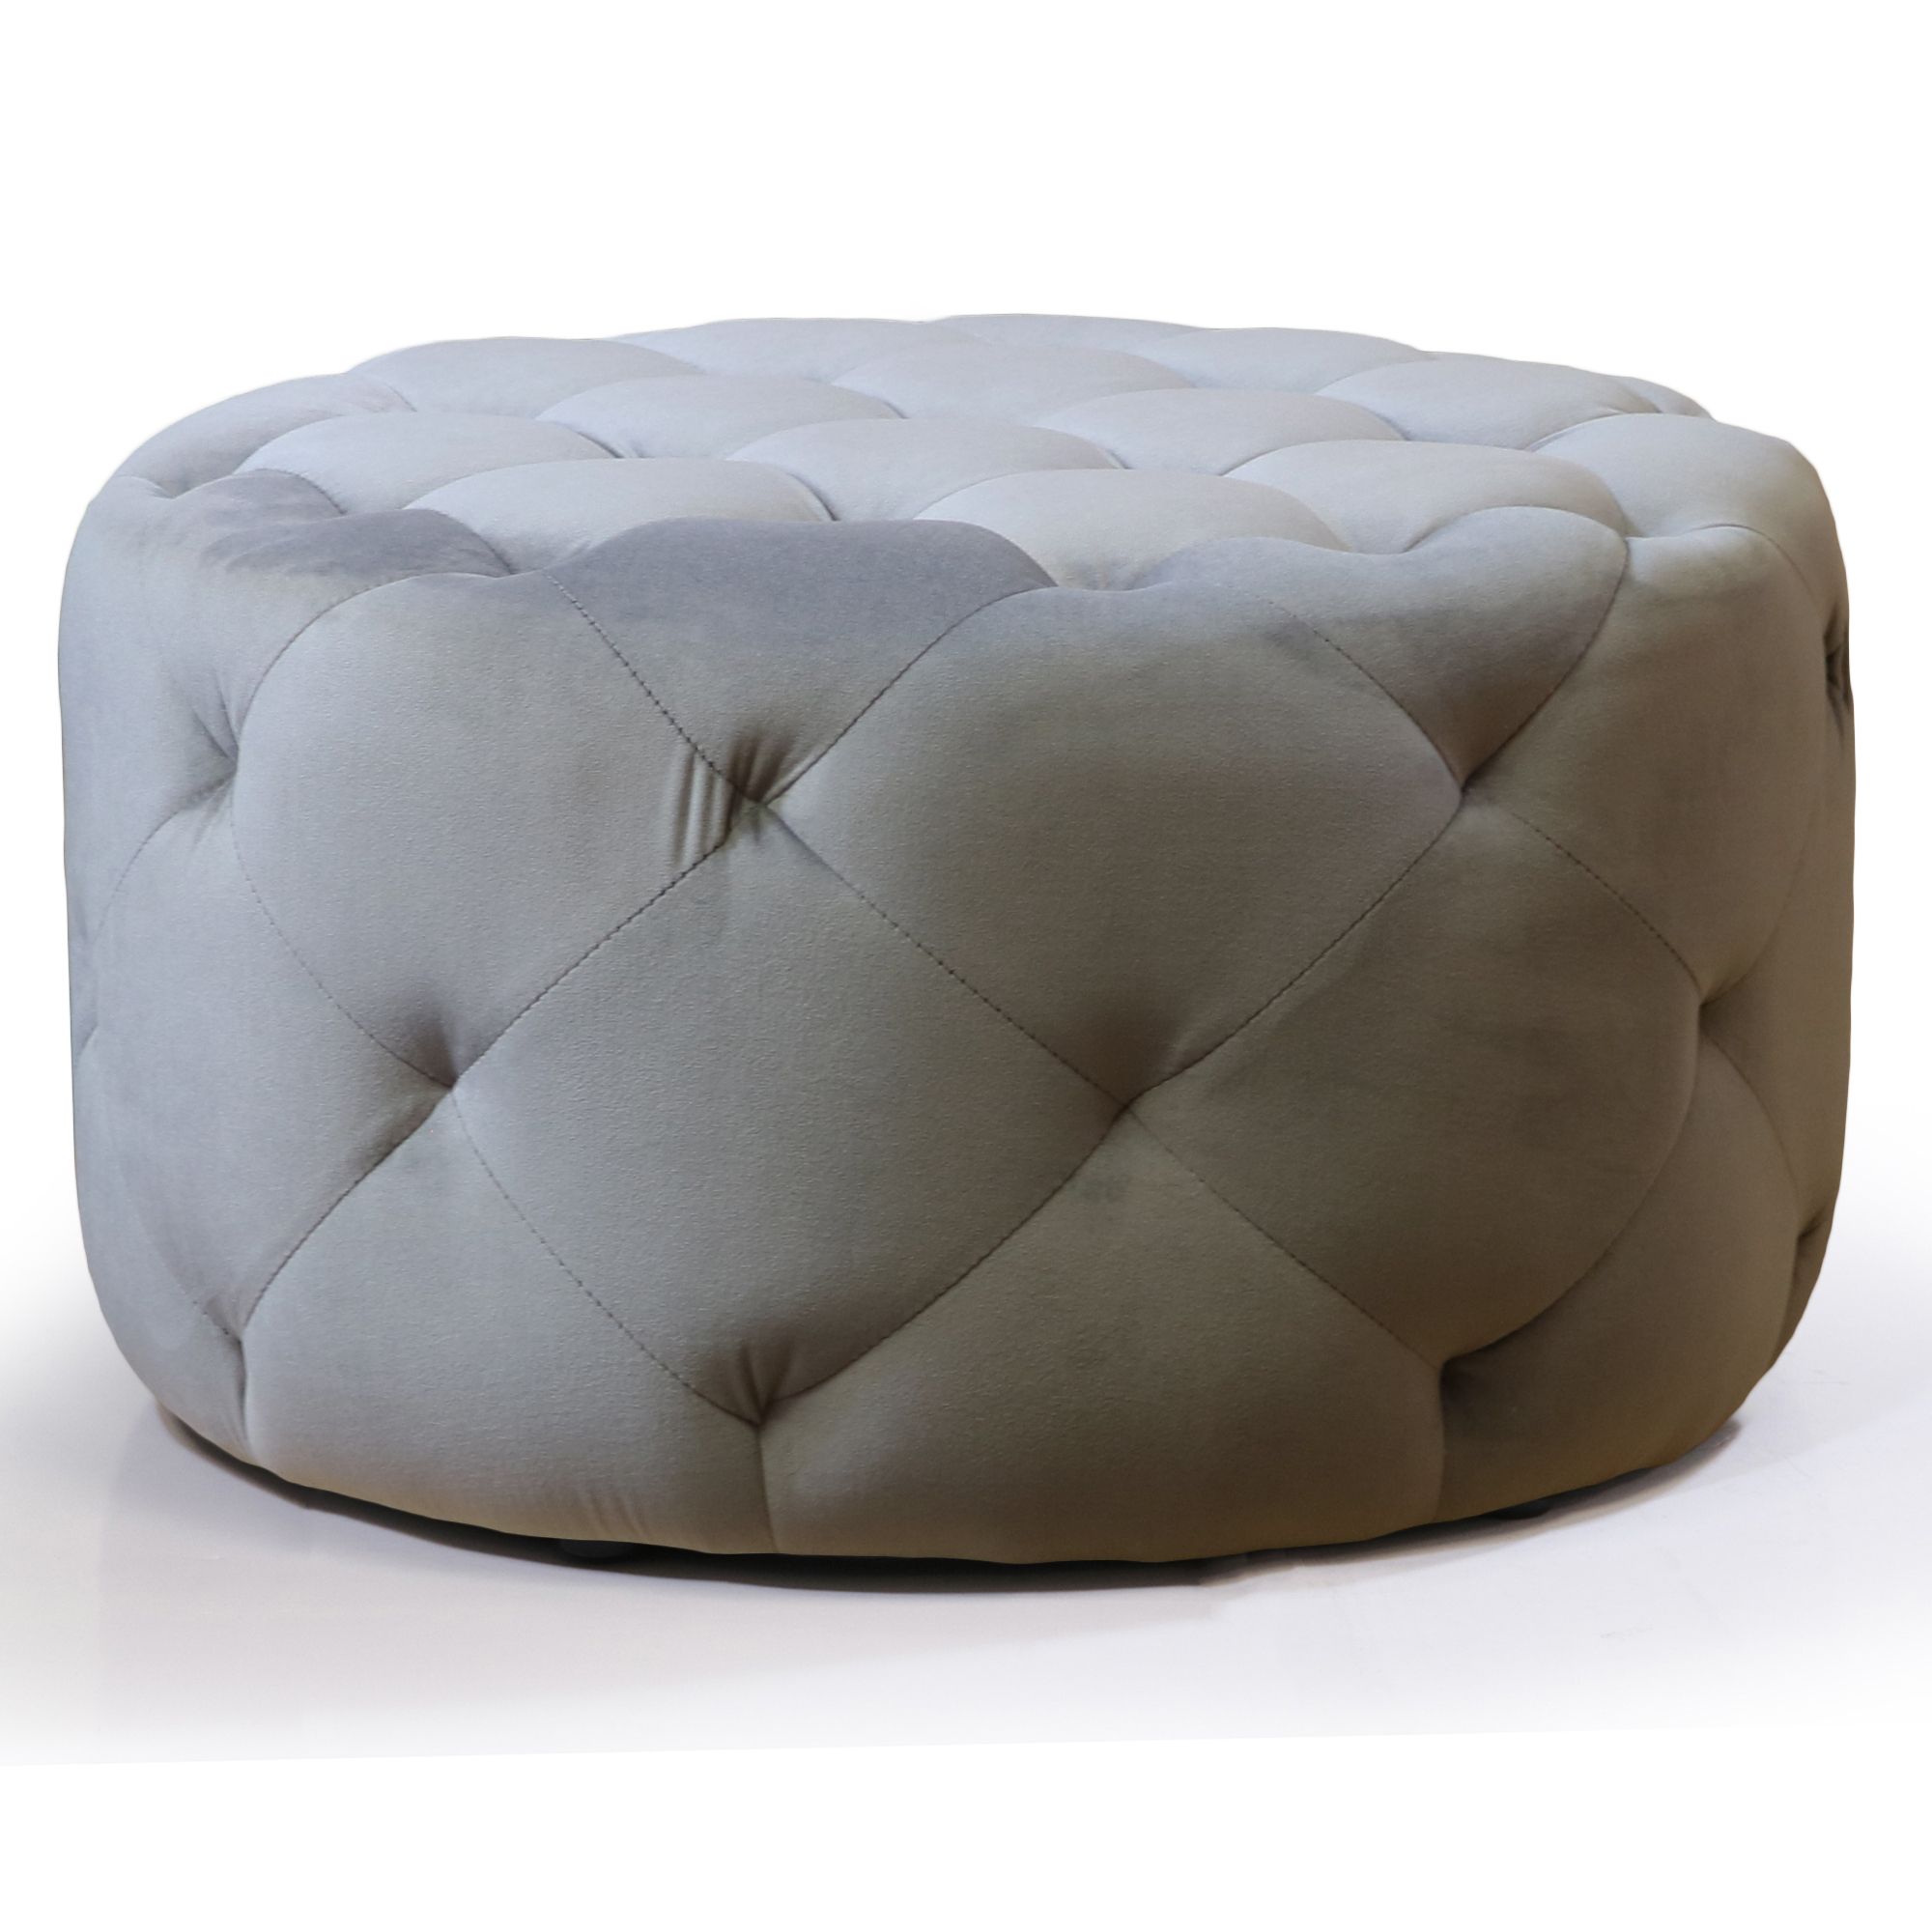 Warehouse Of Tiffany Meerna 24 Inch Round Tufted Padded Ottoman With Regard To Current Textured Aqua Round Pouf Ottomans (View 7 of 10)